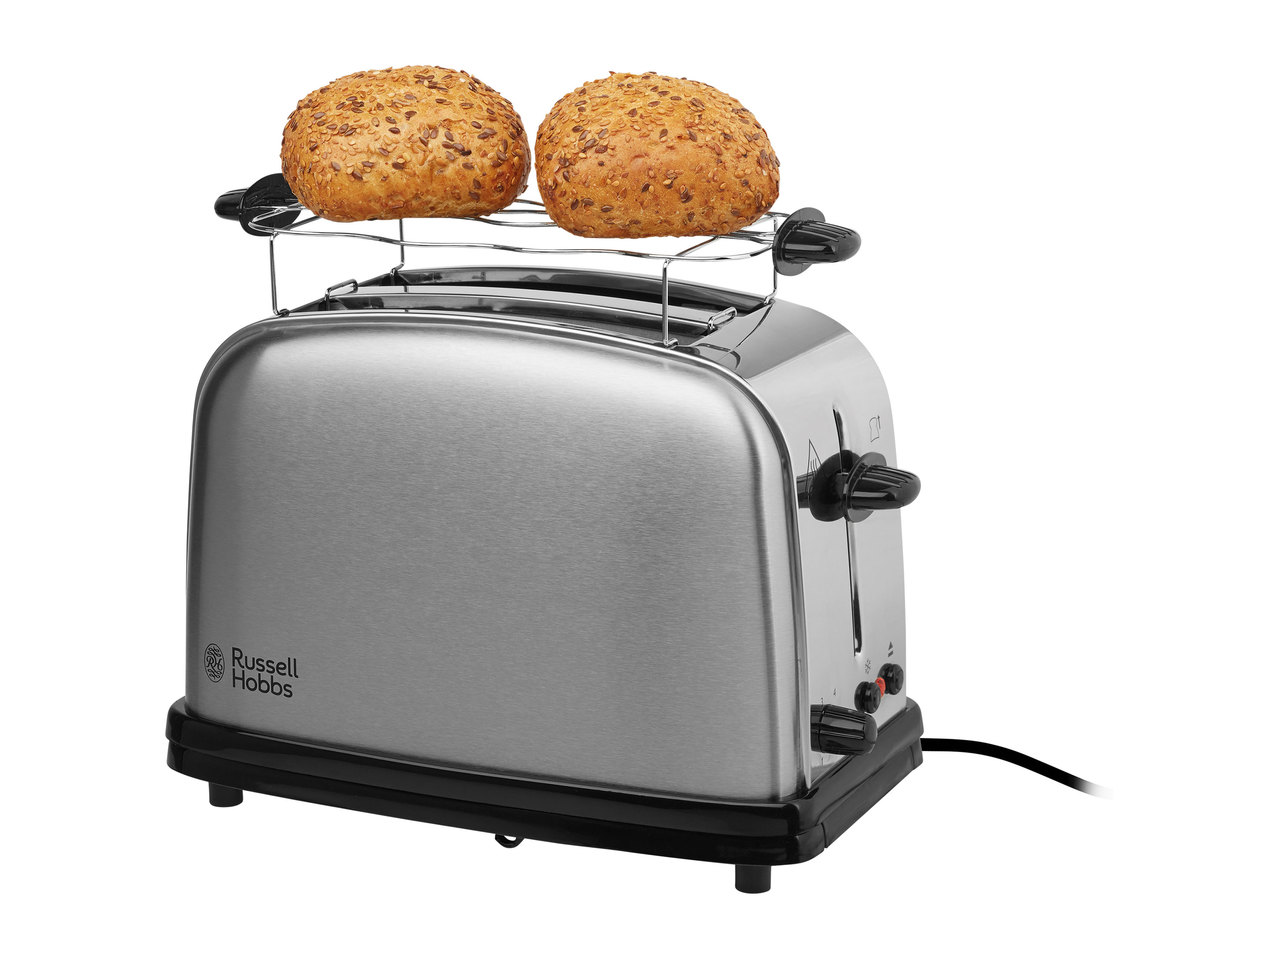 Russell Hobbs 2-Slice Oxford Toaster1